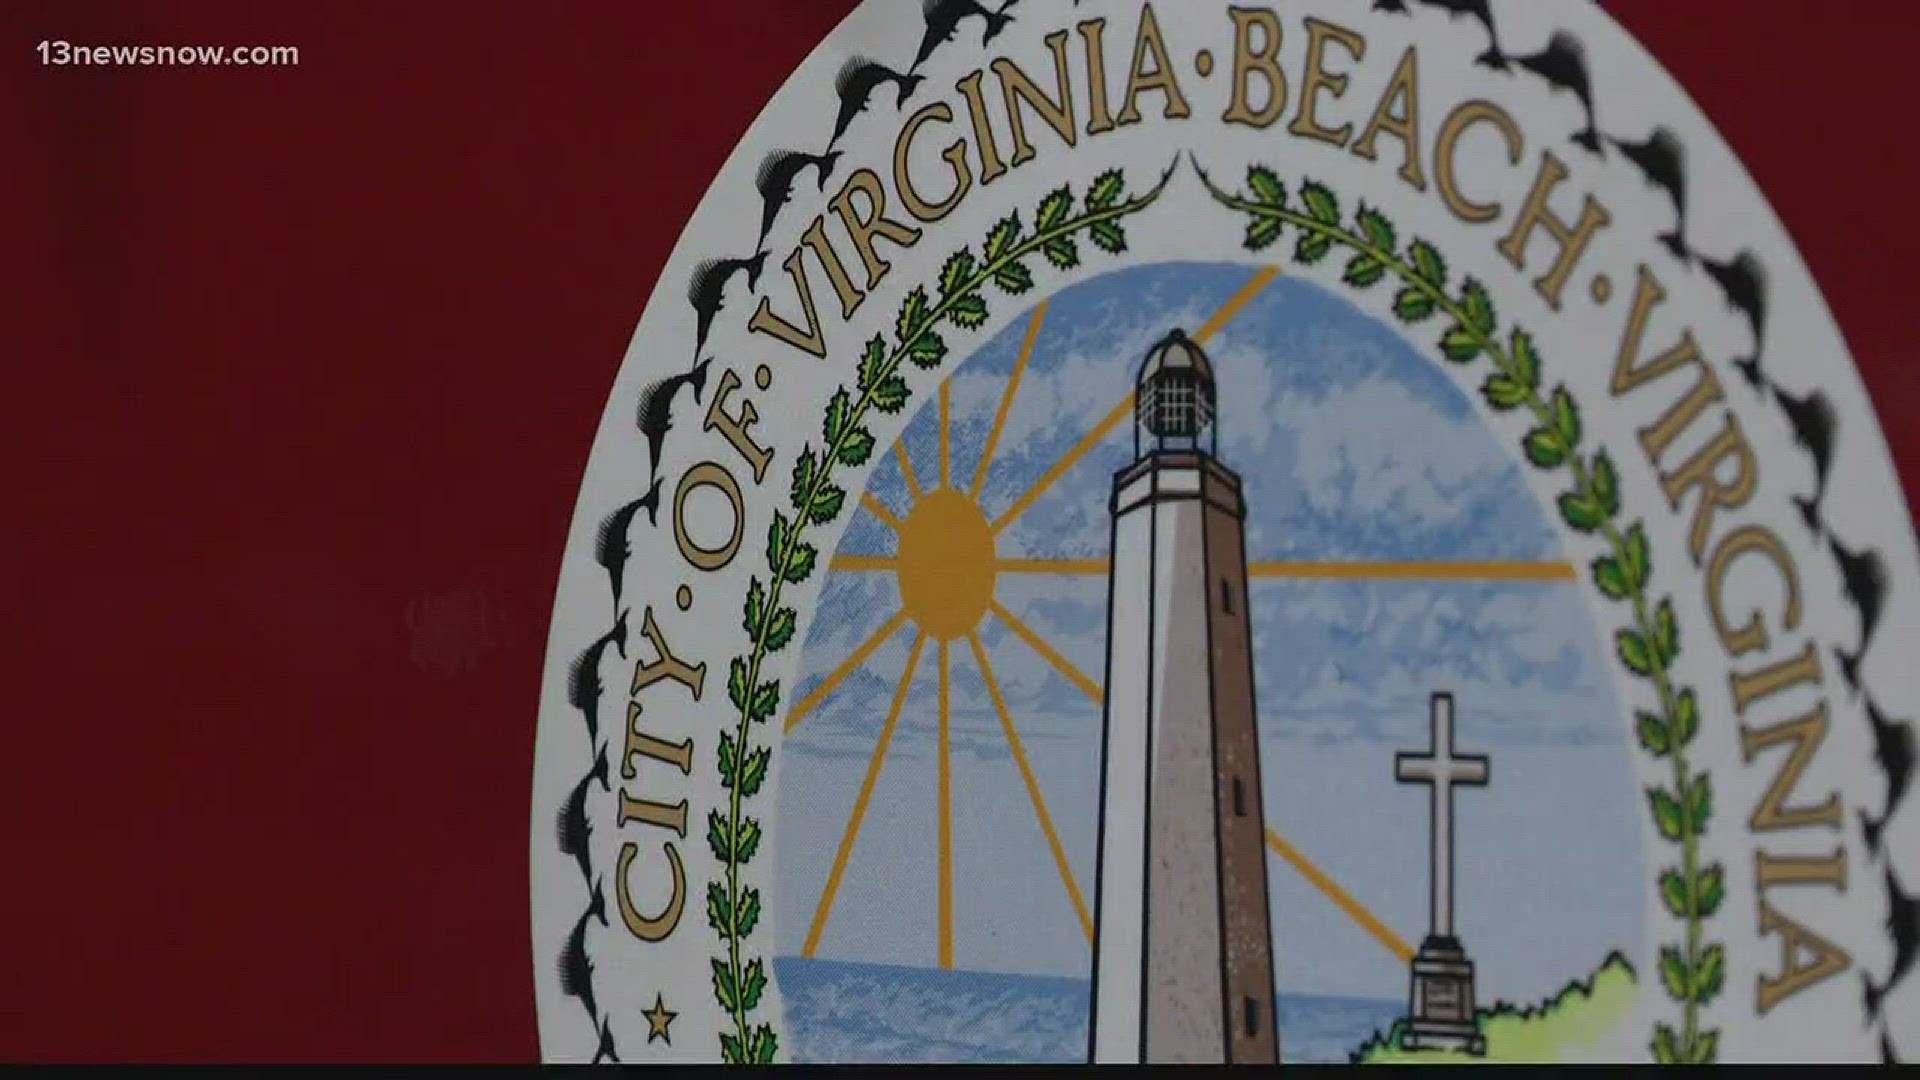 A firefighter is suing the city of Virginia Beach.